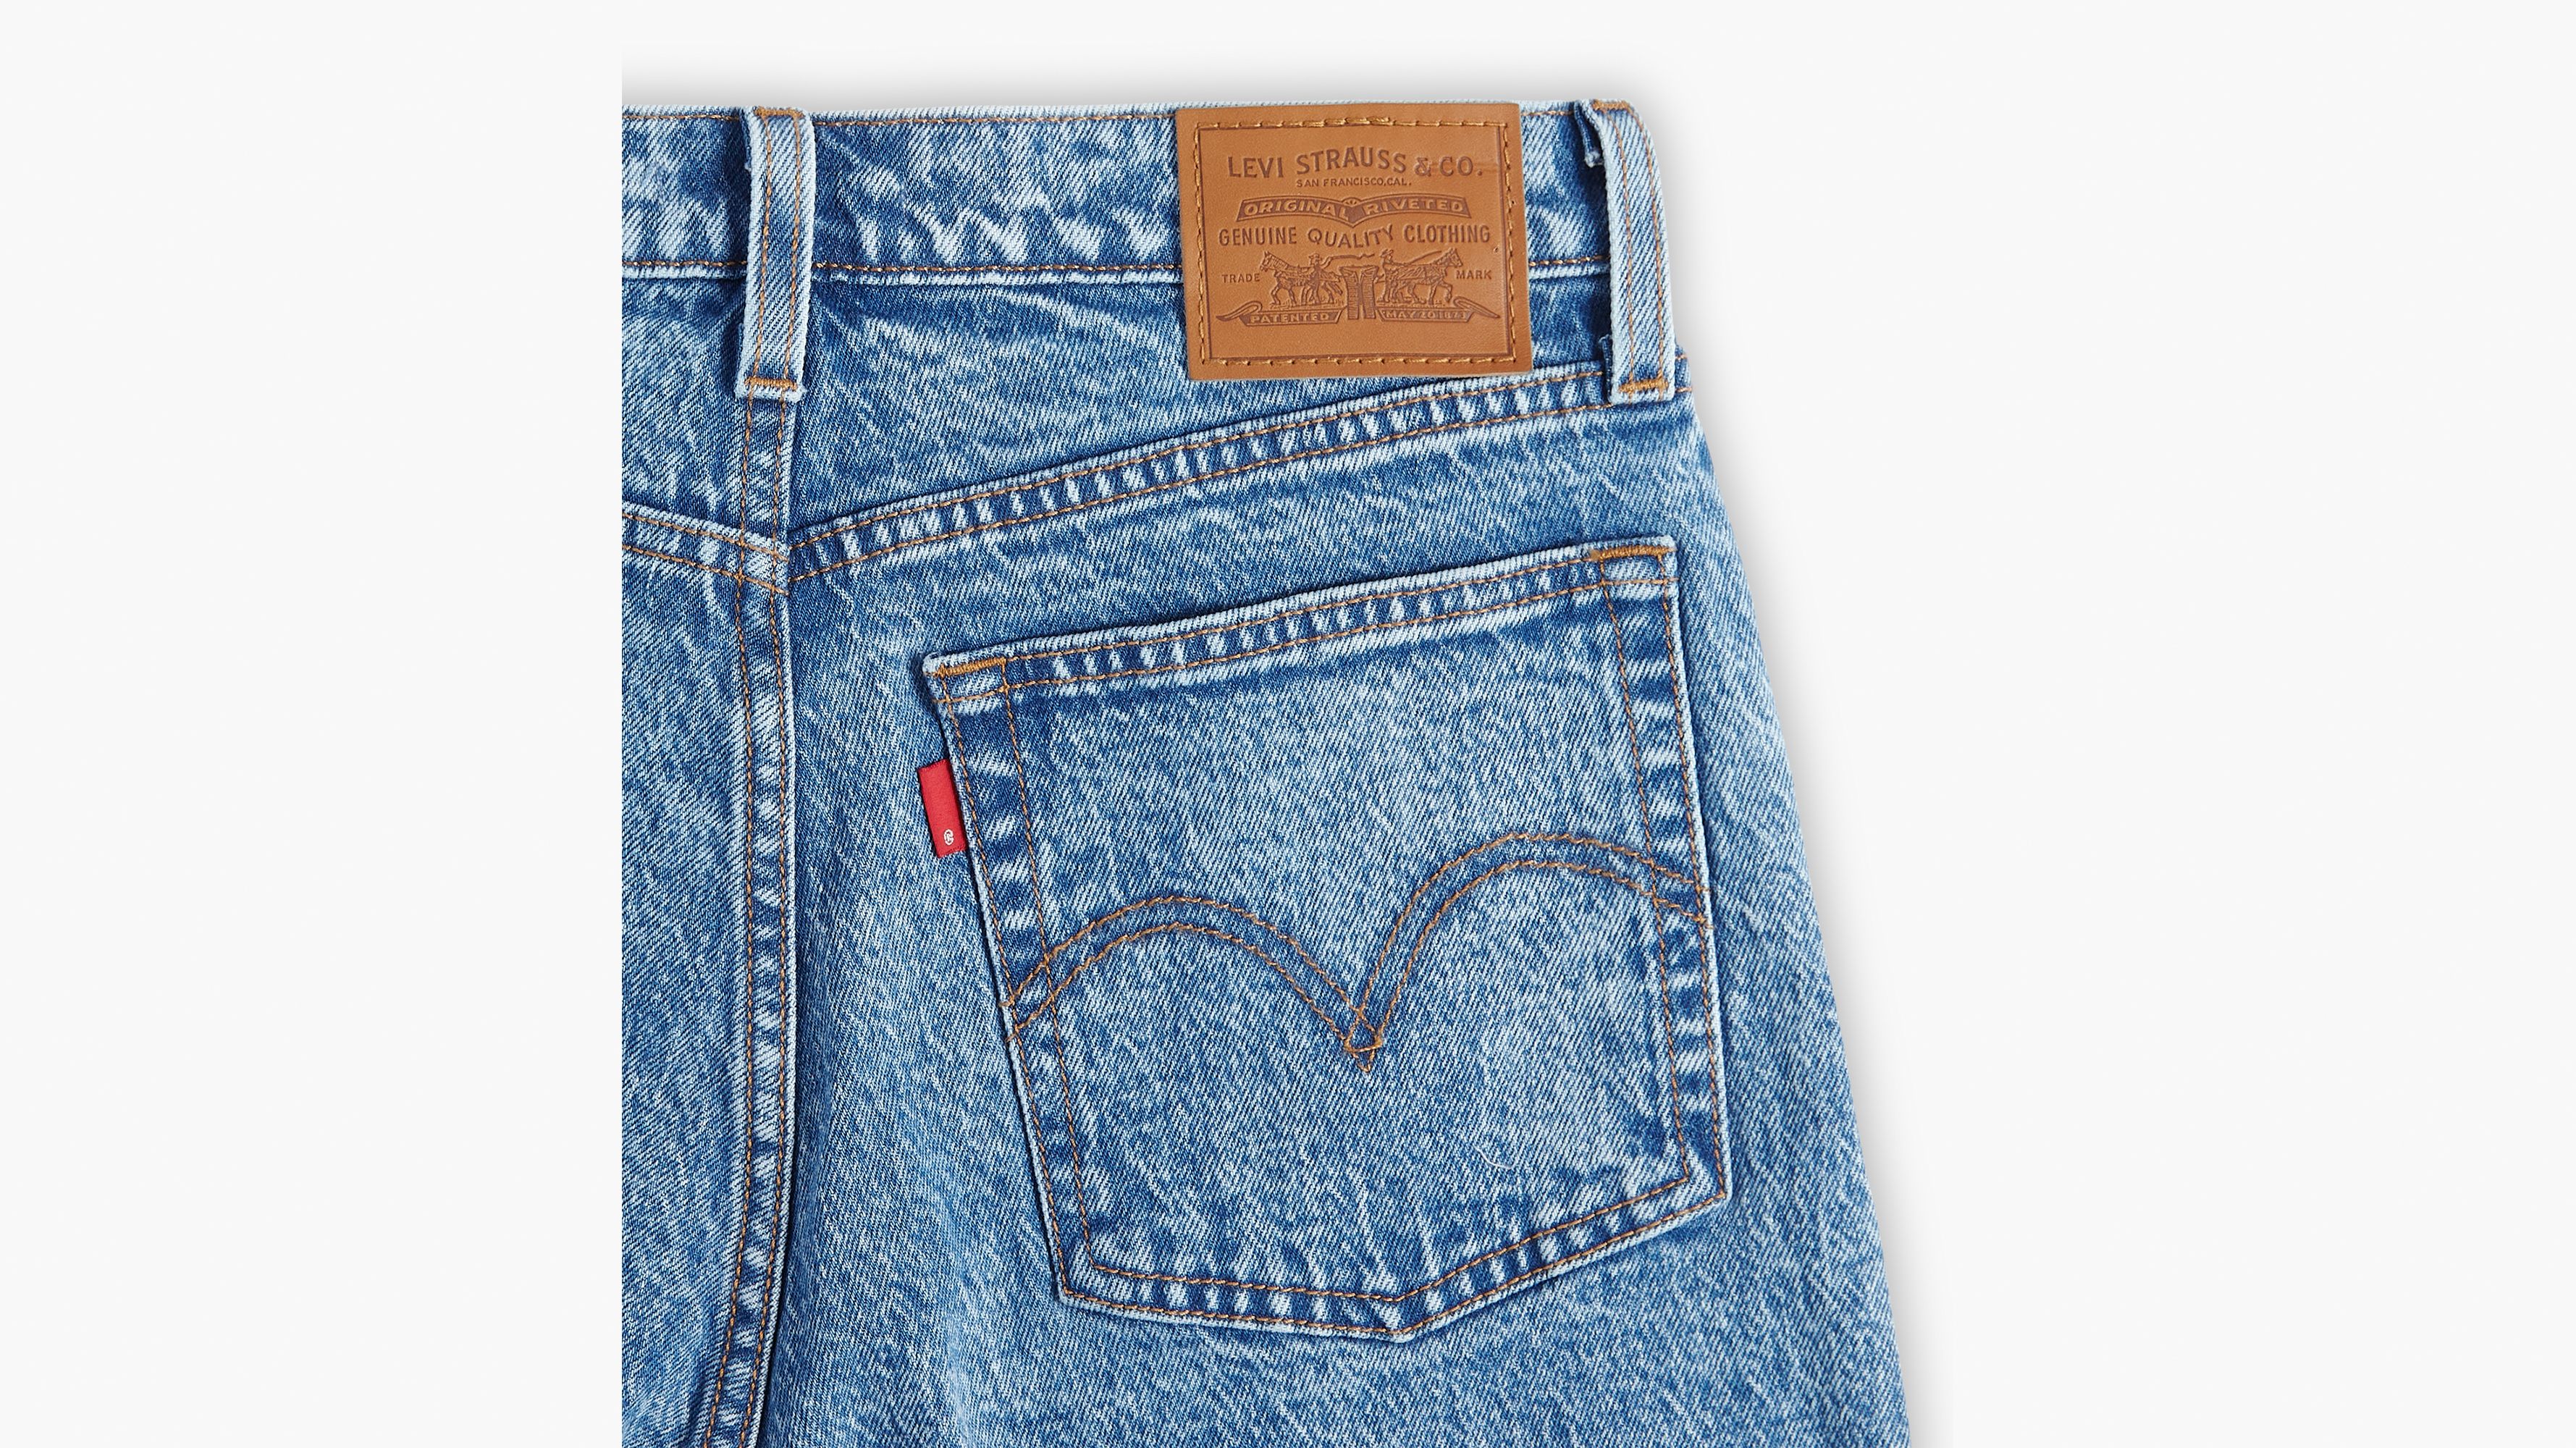 Just Jeans - Everyone needs a Wedgie (jean)! Your chance to win